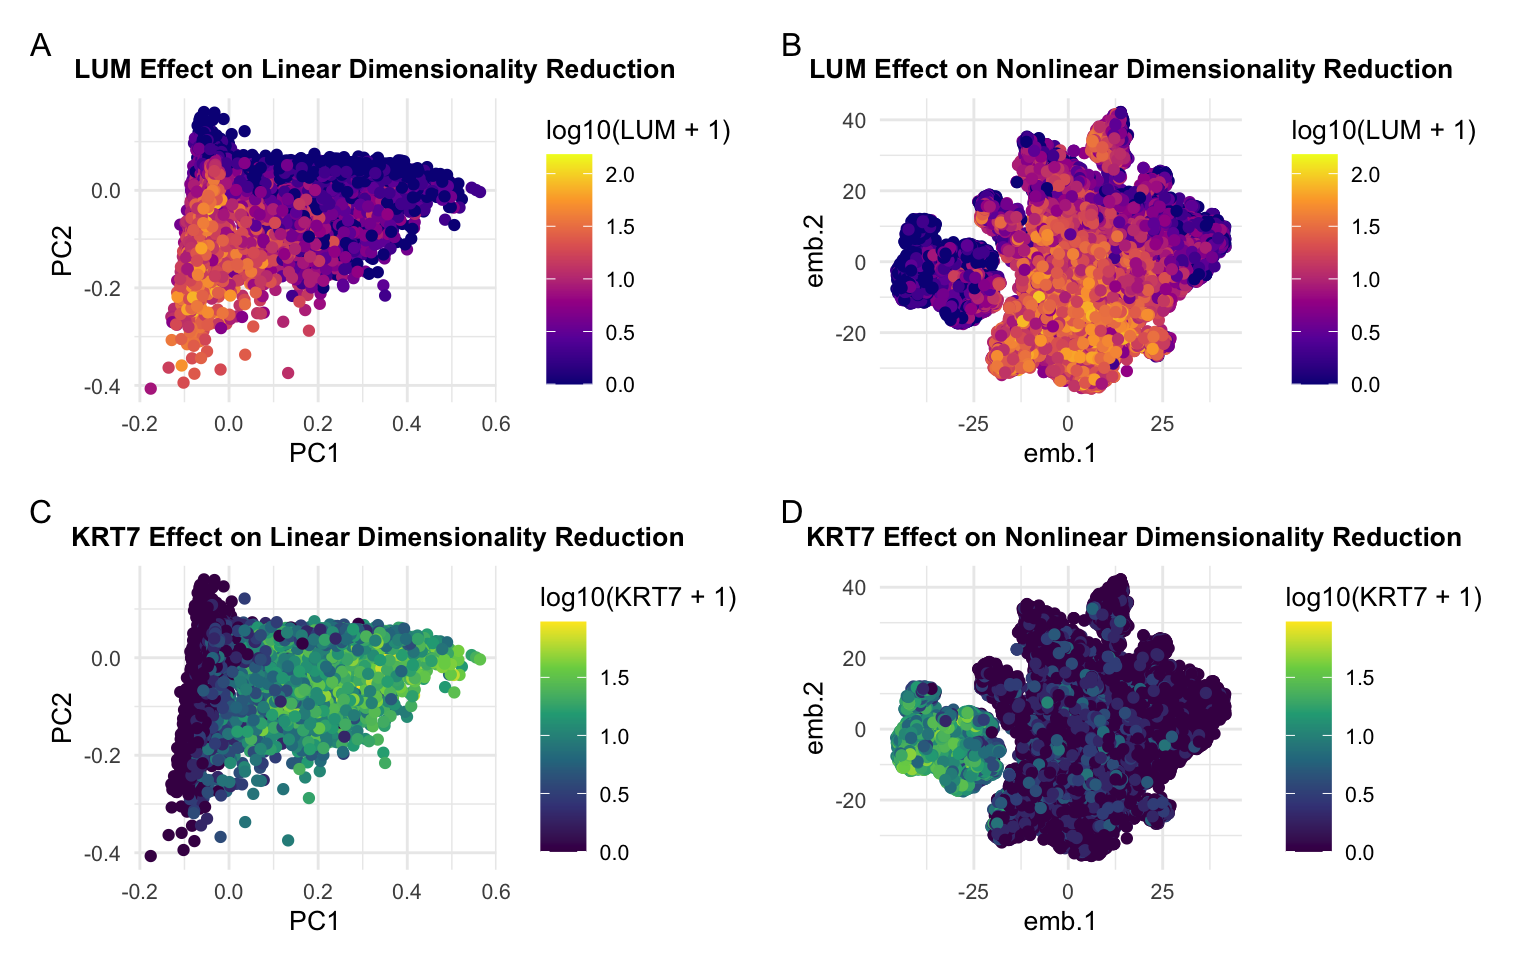 Exploring Gene Expression Effects on Linear and Nonlinear Dimensionality Reduction